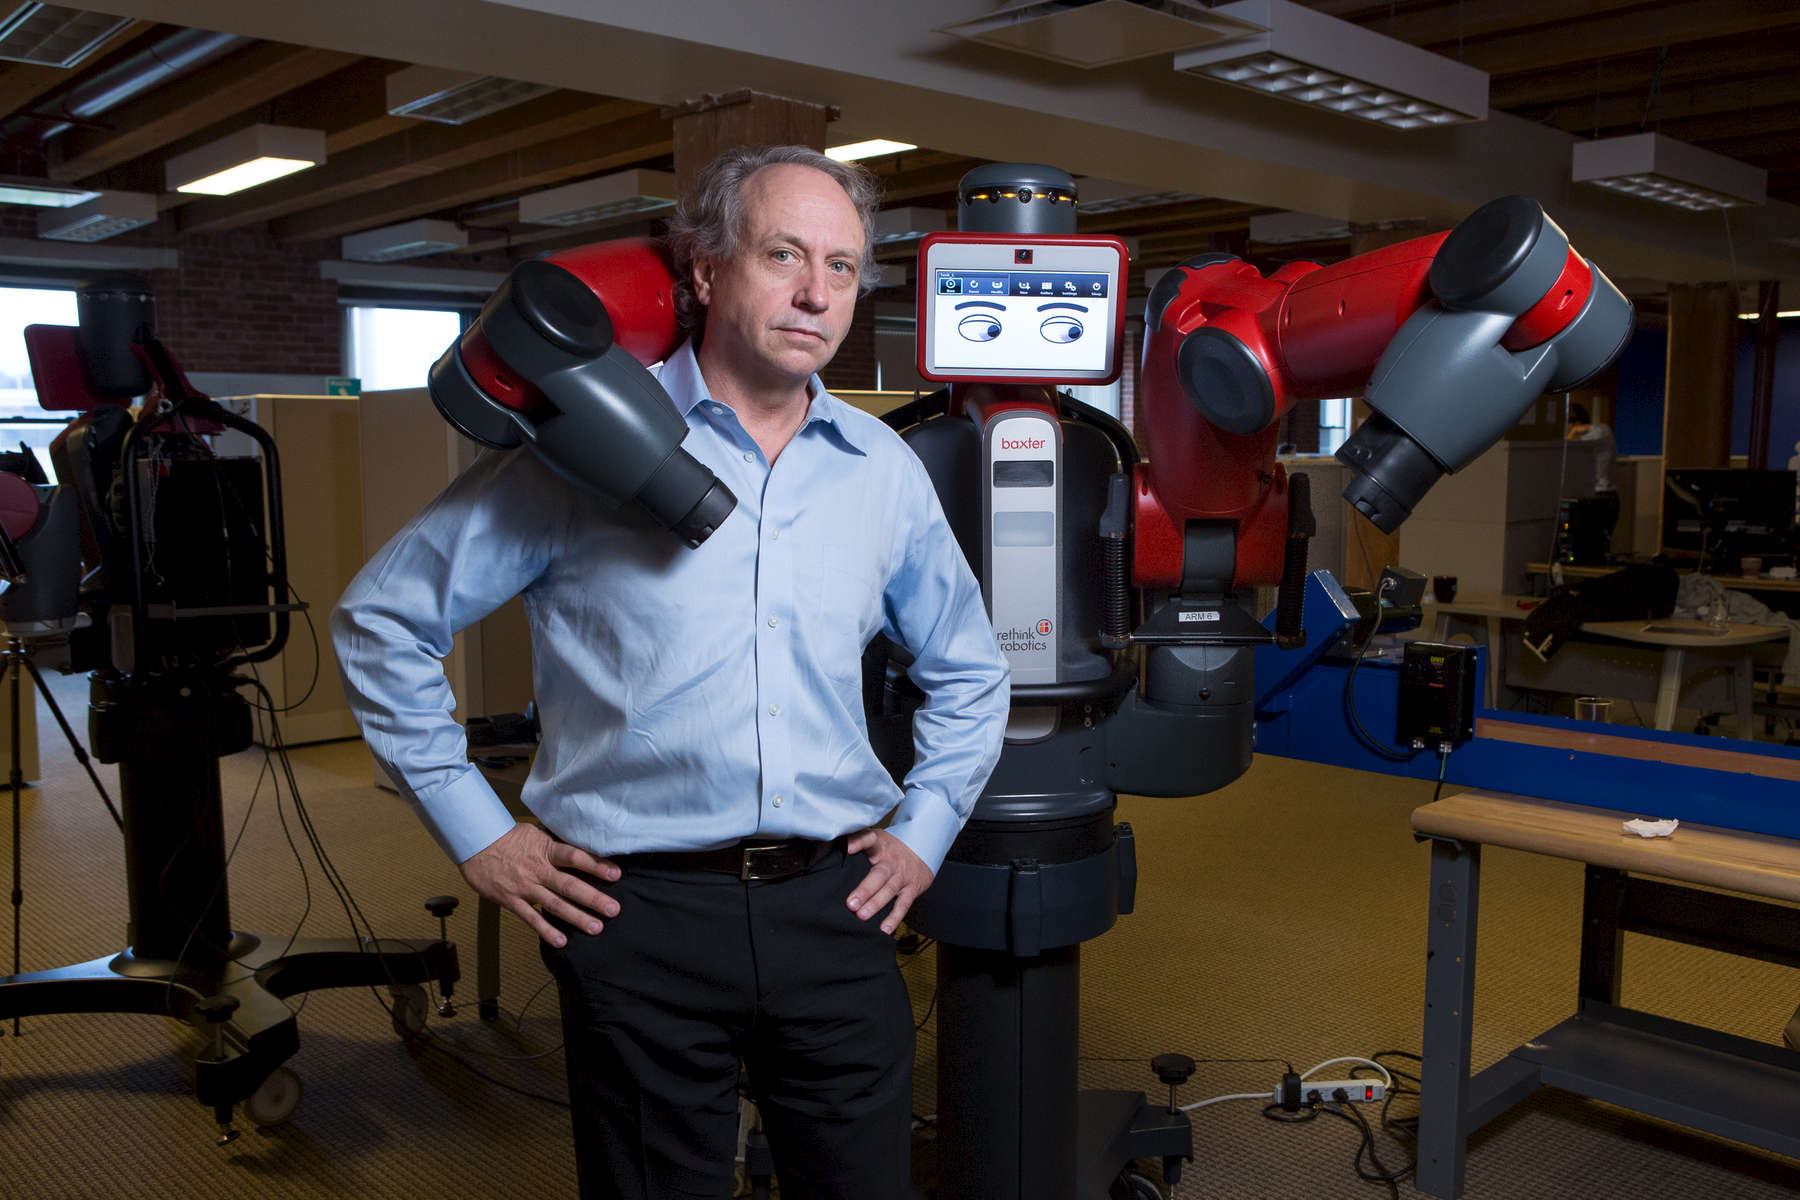 Boston, MA., September 5, 2012: Rodney Brooks, founder, chairman and CTO of Rethink Robotics with {quote}Baxter{quote} a robot that can change facial expressions depending on the task that it is performing. The company says it is developing a new generation of robots to improve productivity in manufacturing environments. Photograph by Evan McGlinn for The New York Times.